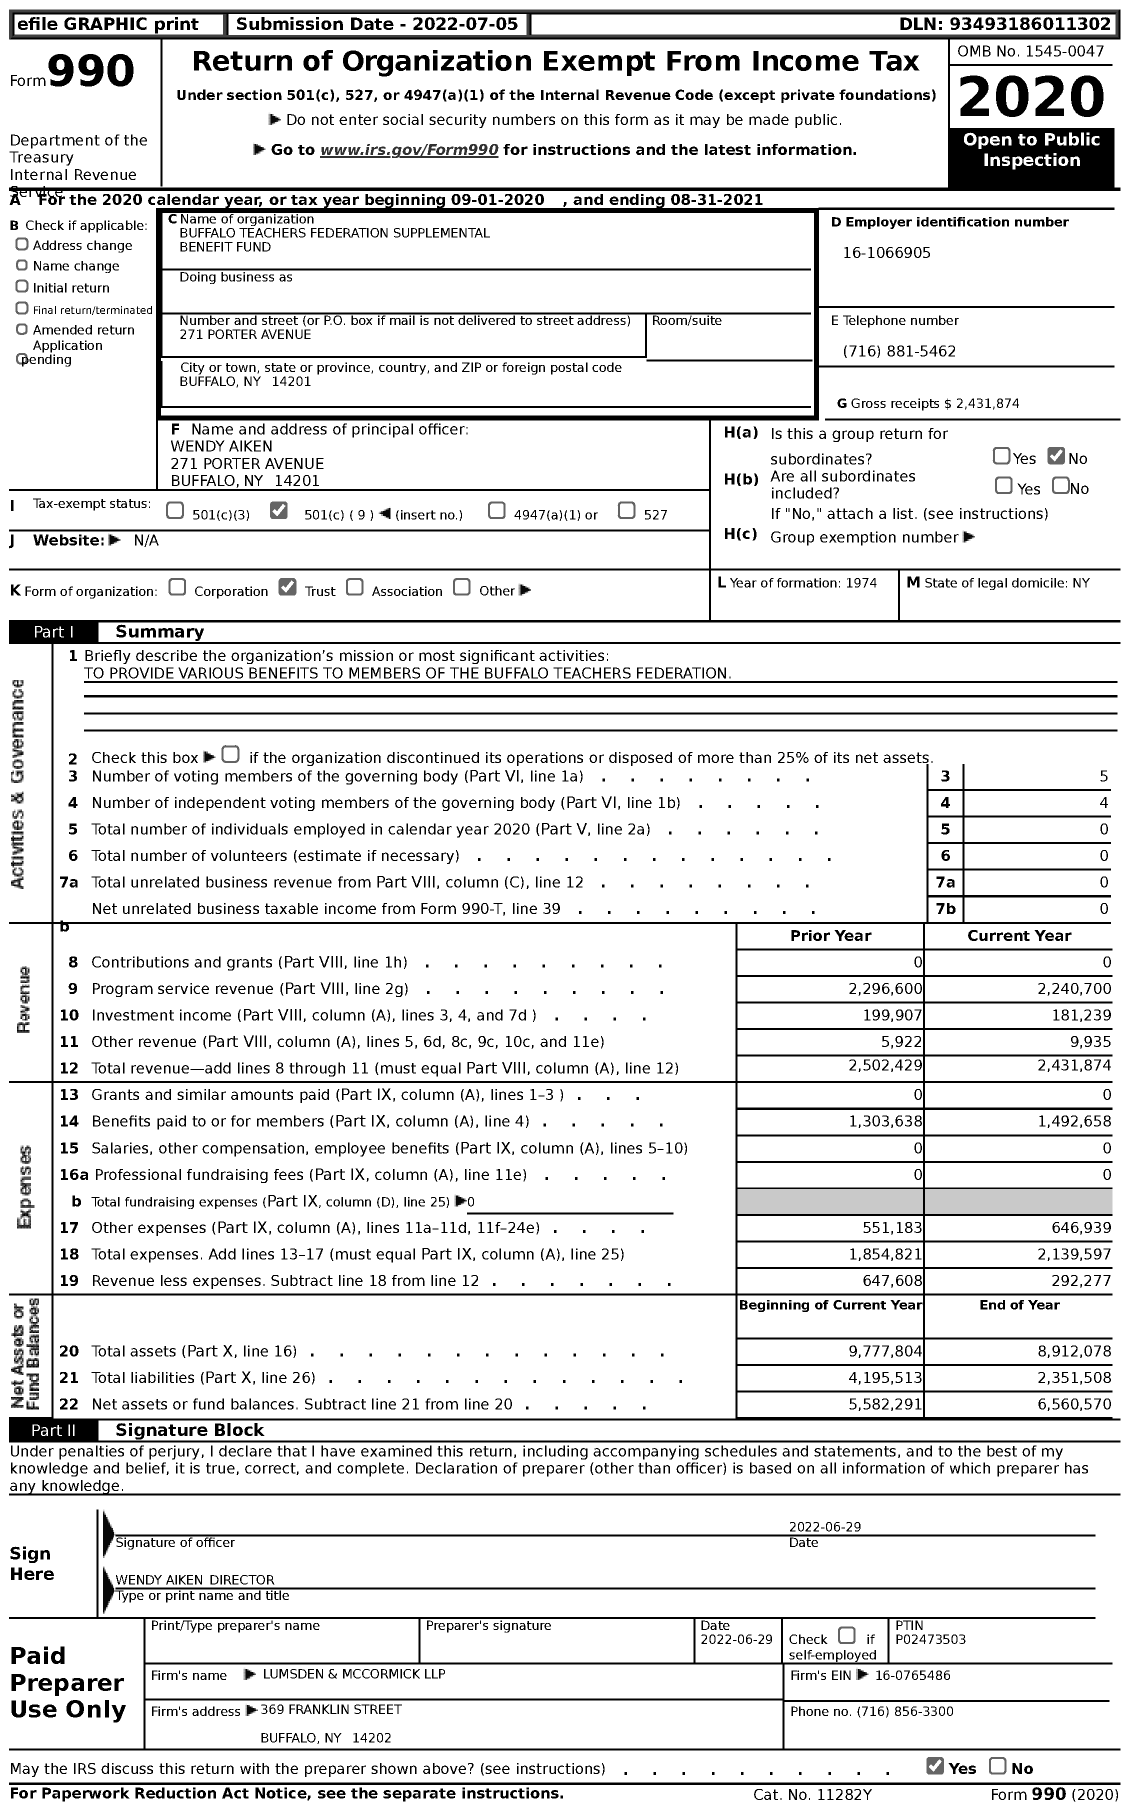 Image of first page of 2020 Form 990 for Buffalo Teachers Federation Supplemental Benefit Fund